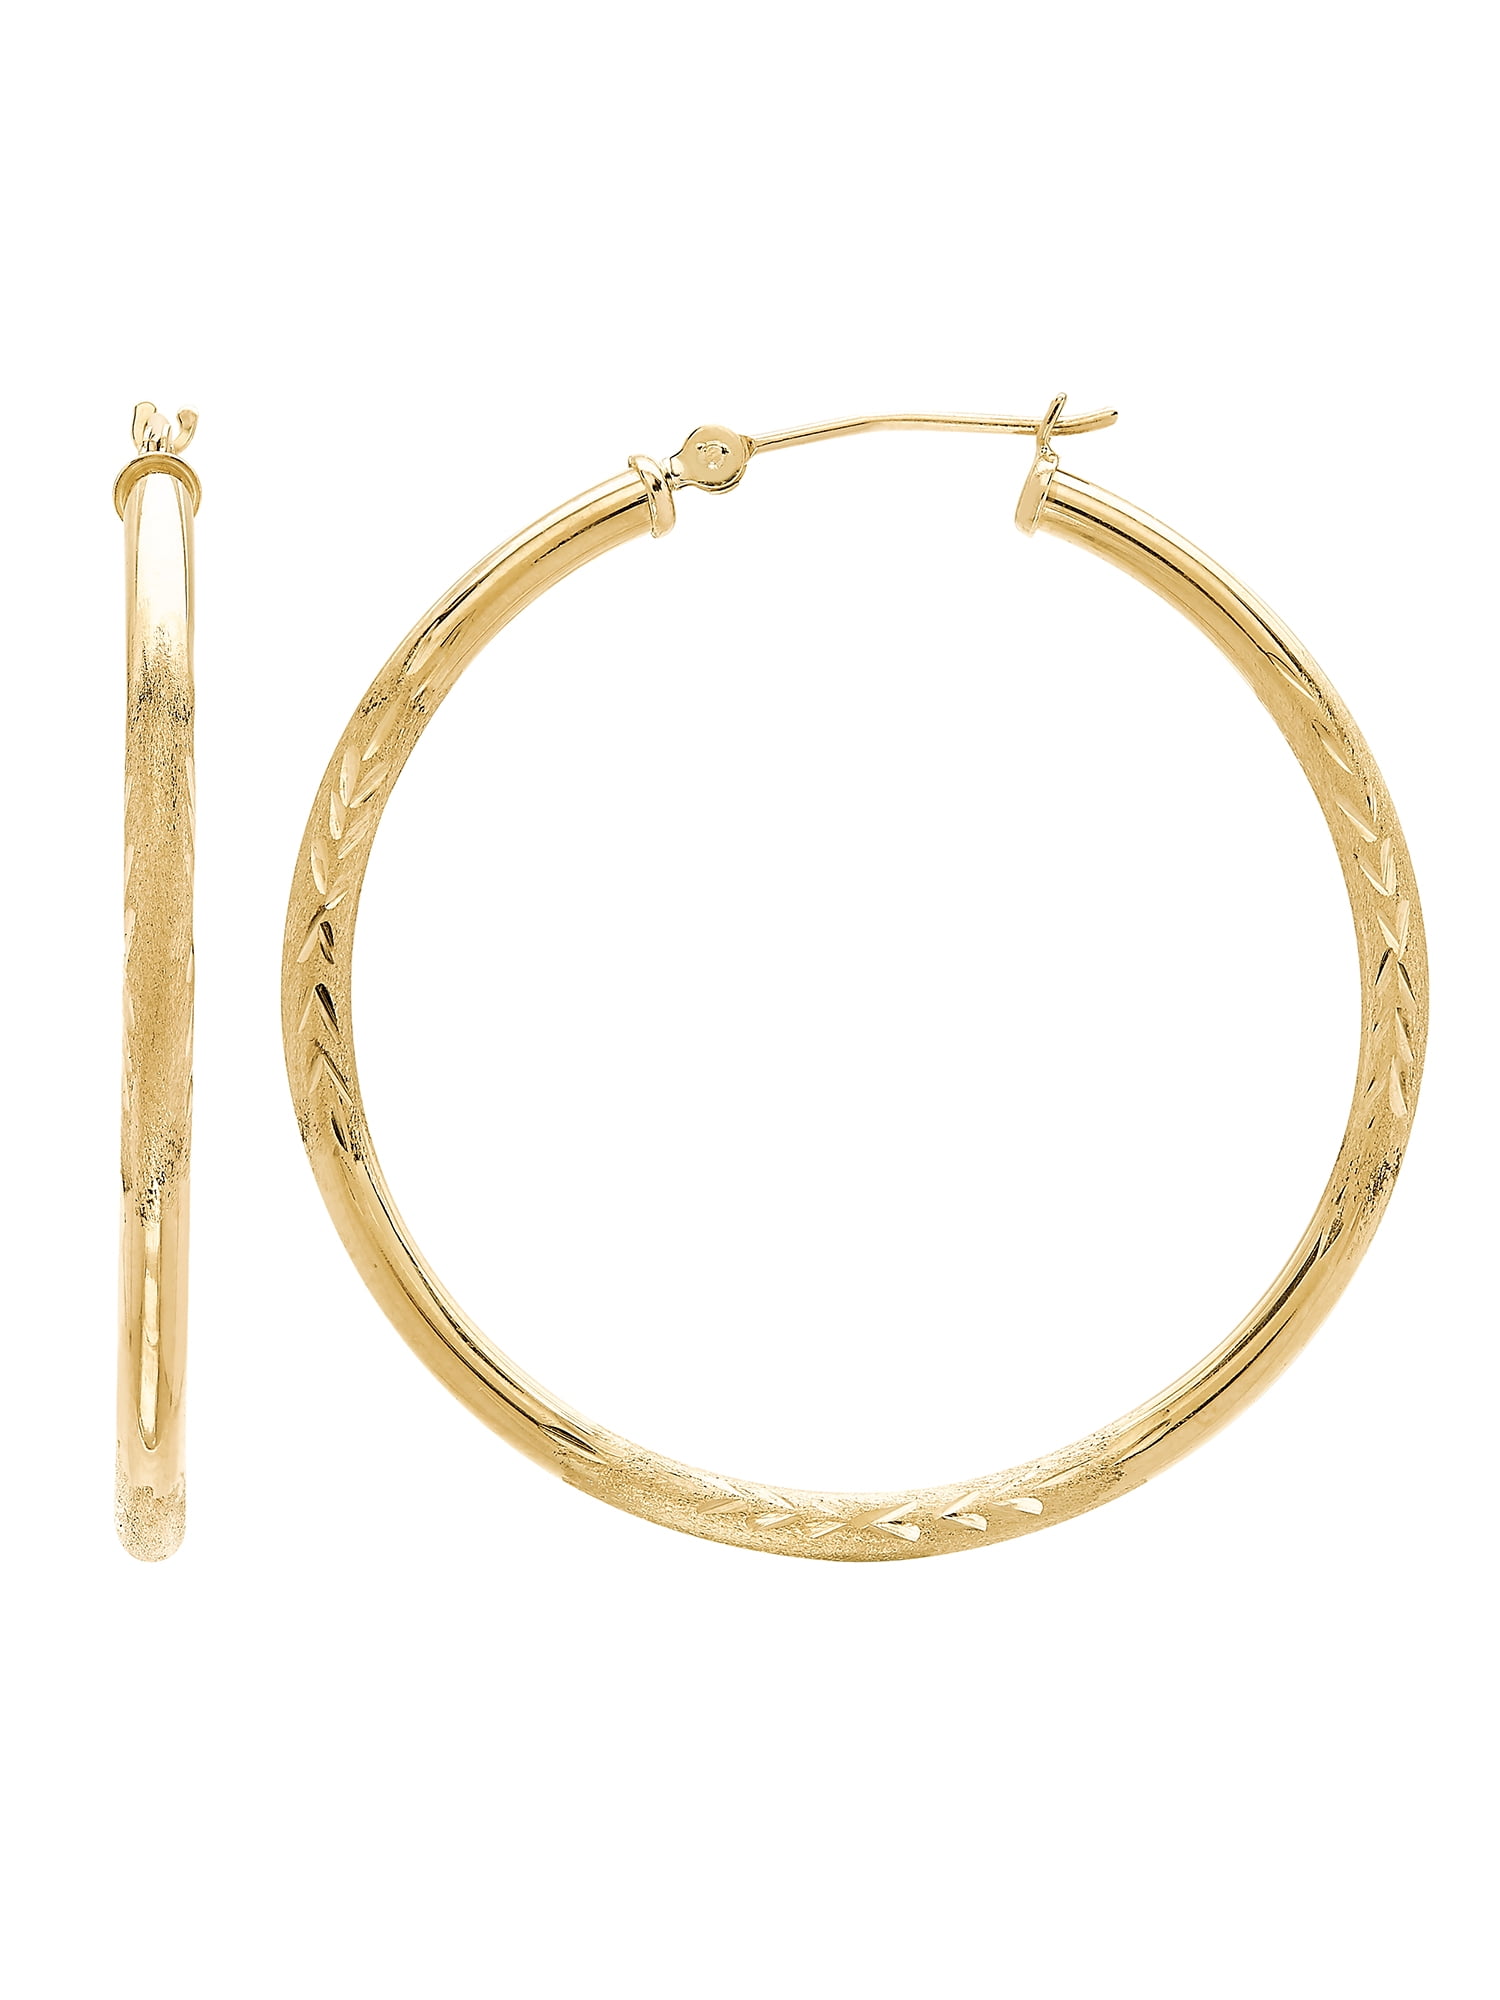 Brilliance Fine Jewelry 10K Yellow Gold 2.3MM x 37MM Hollow Round Hoop  Earrings